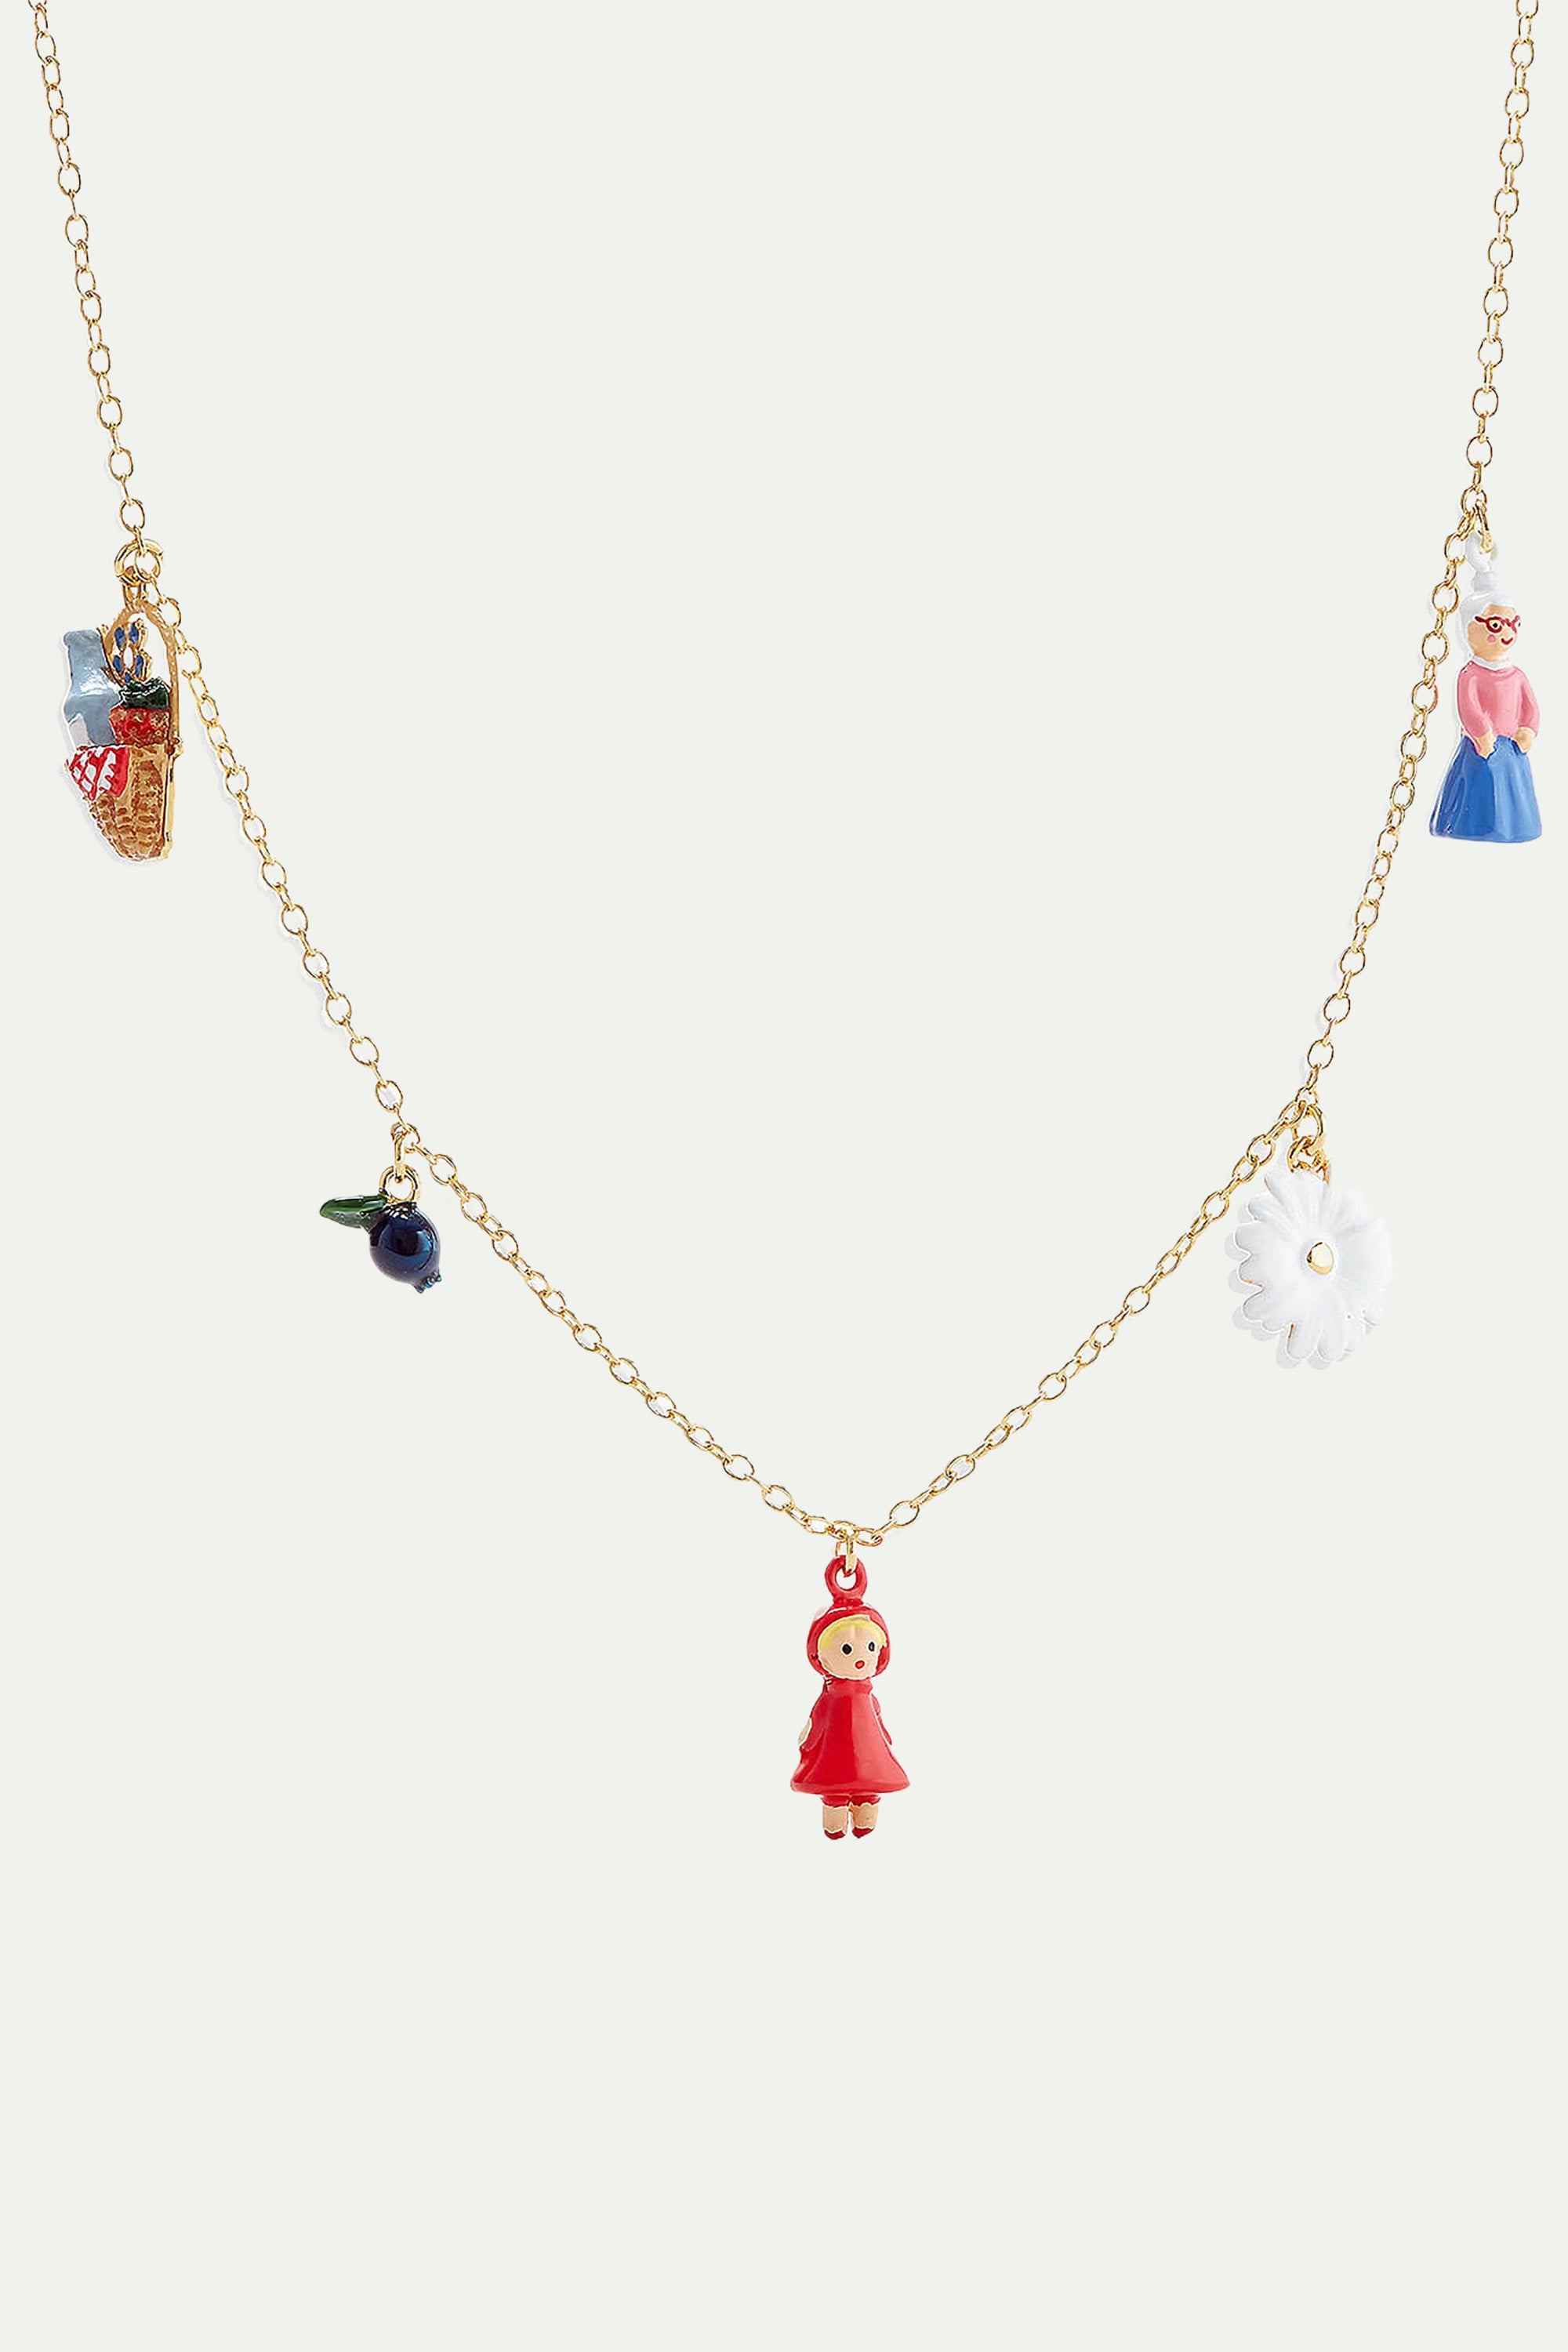 Little Red Riding Hood Picnic pendant necklace